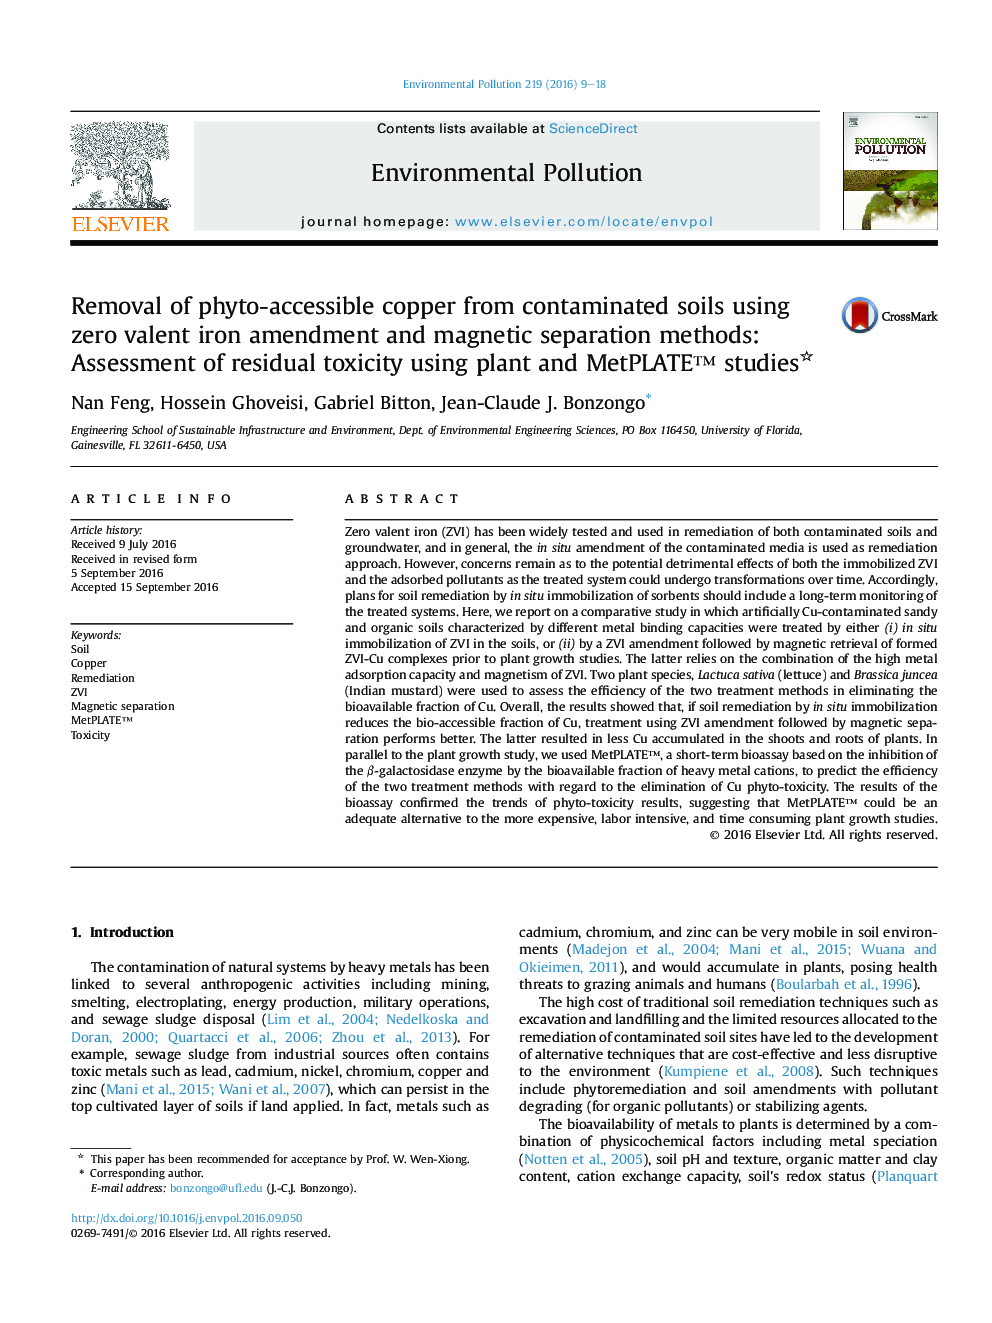 Removal of phyto-accessible copper from contaminated soils using zero valent iron amendment and magnetic separation methods: Assessment of residual toxicity using plant and MetPLATE™ studies 